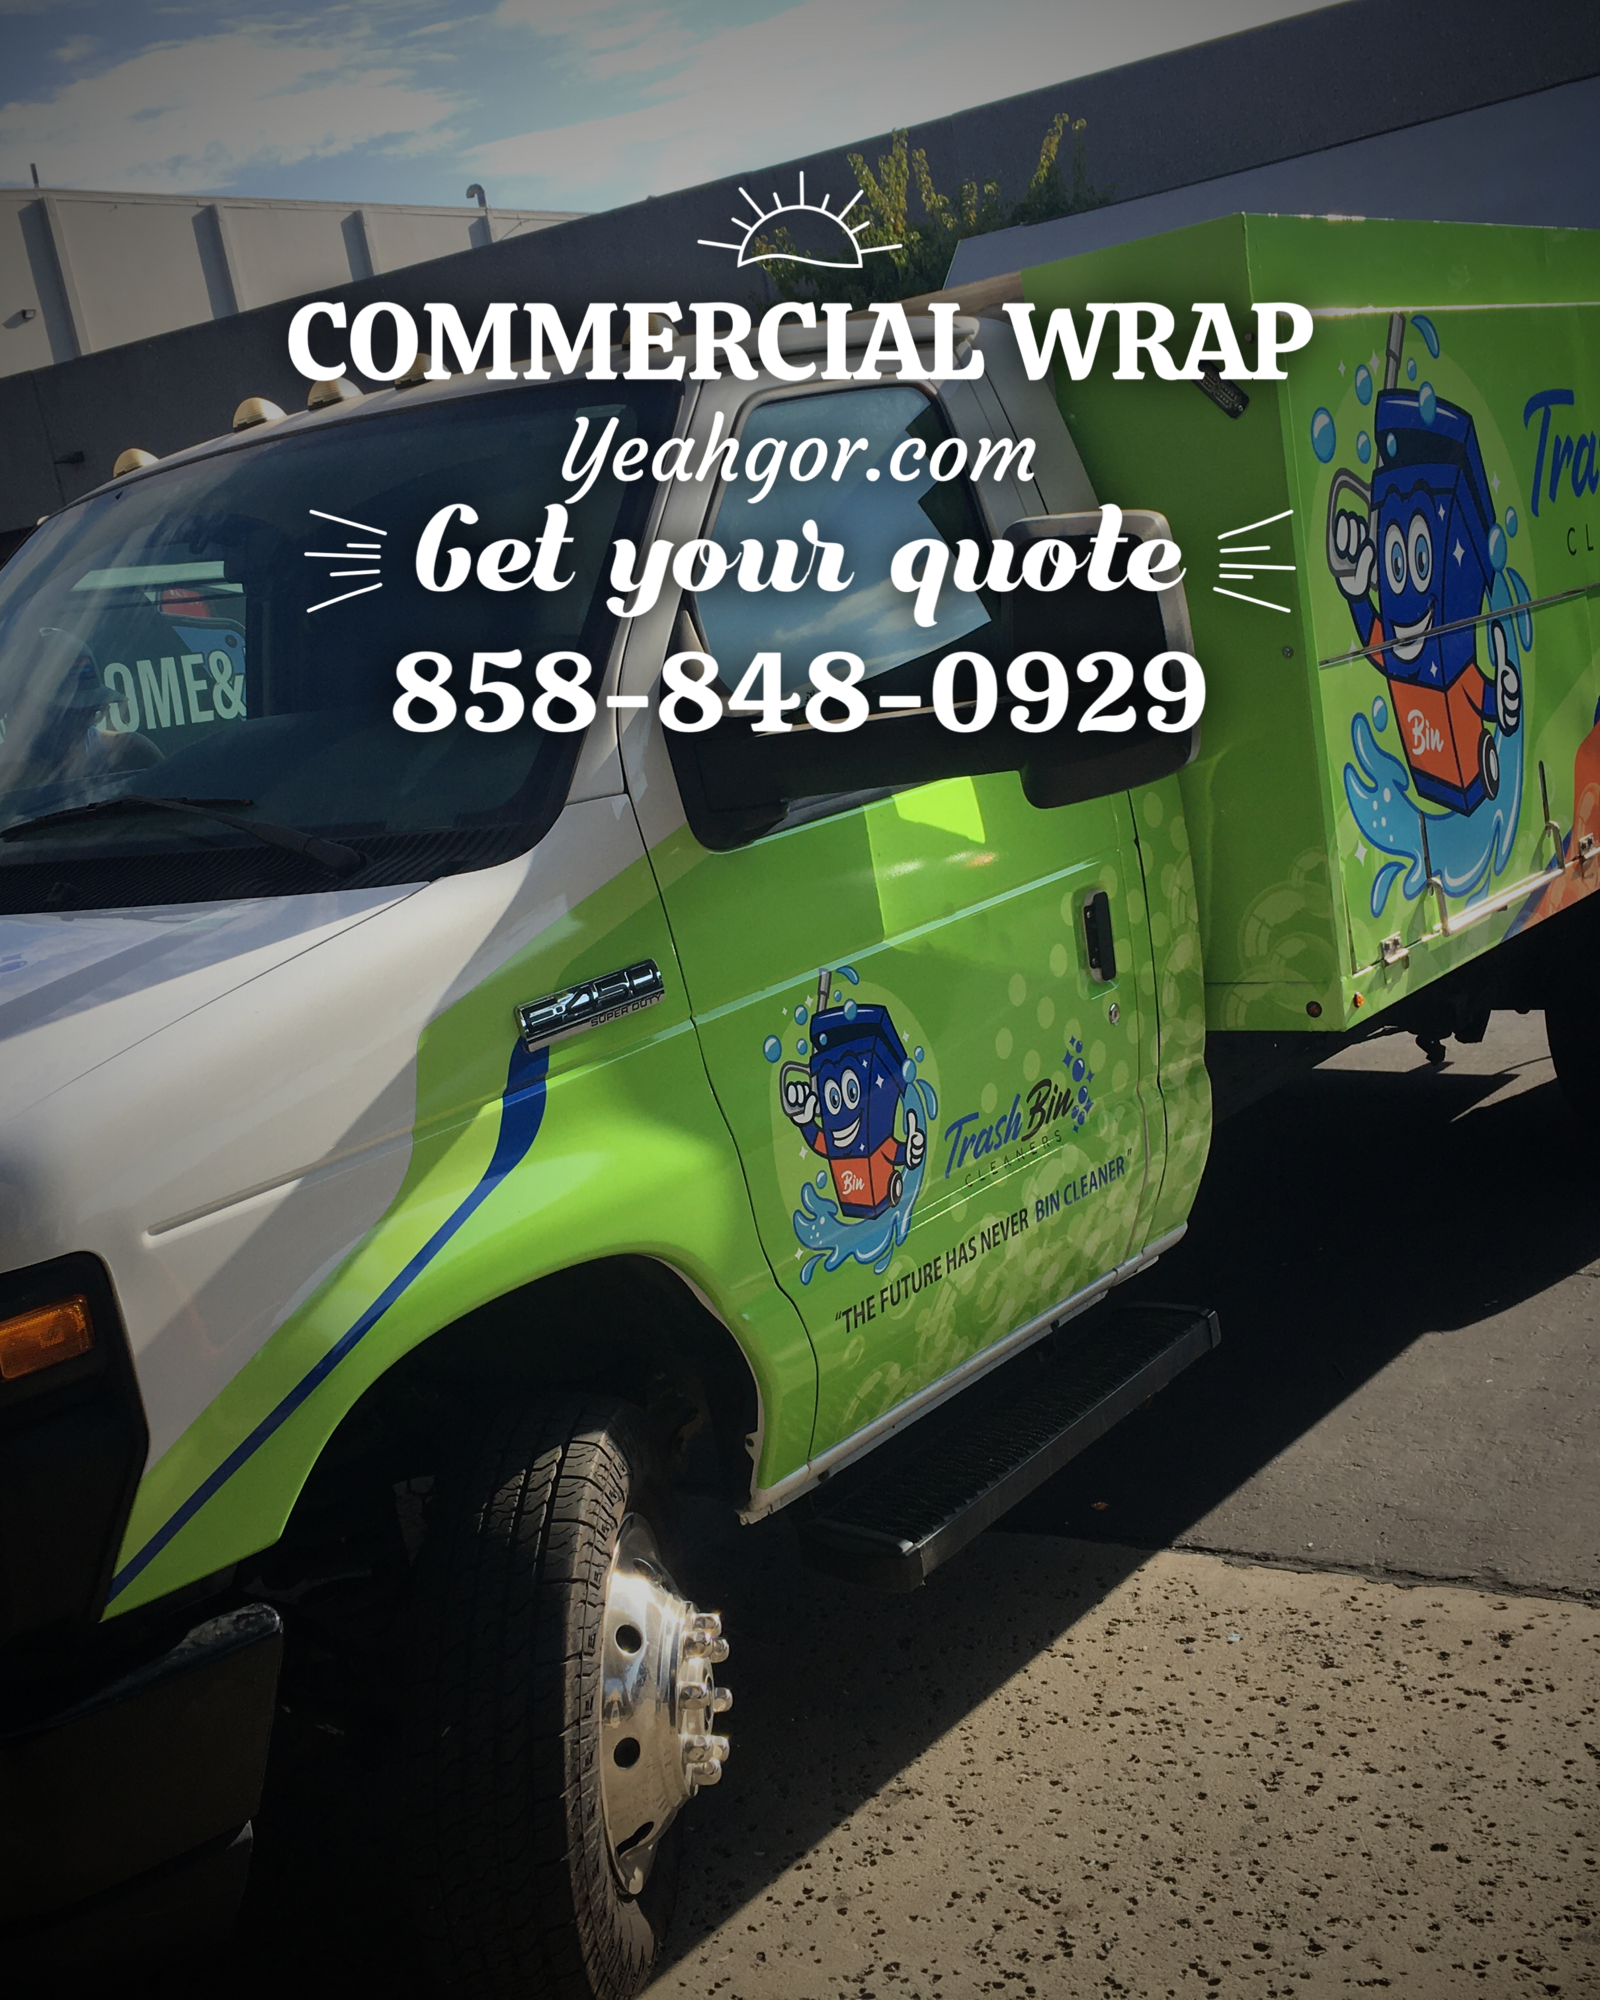 Vista, CA – Vehicle Graphics and Car Signage San Diego for Small Businesses DM for details We do the car signage and vinyl decals for cars, vans, trailers, and trucks.